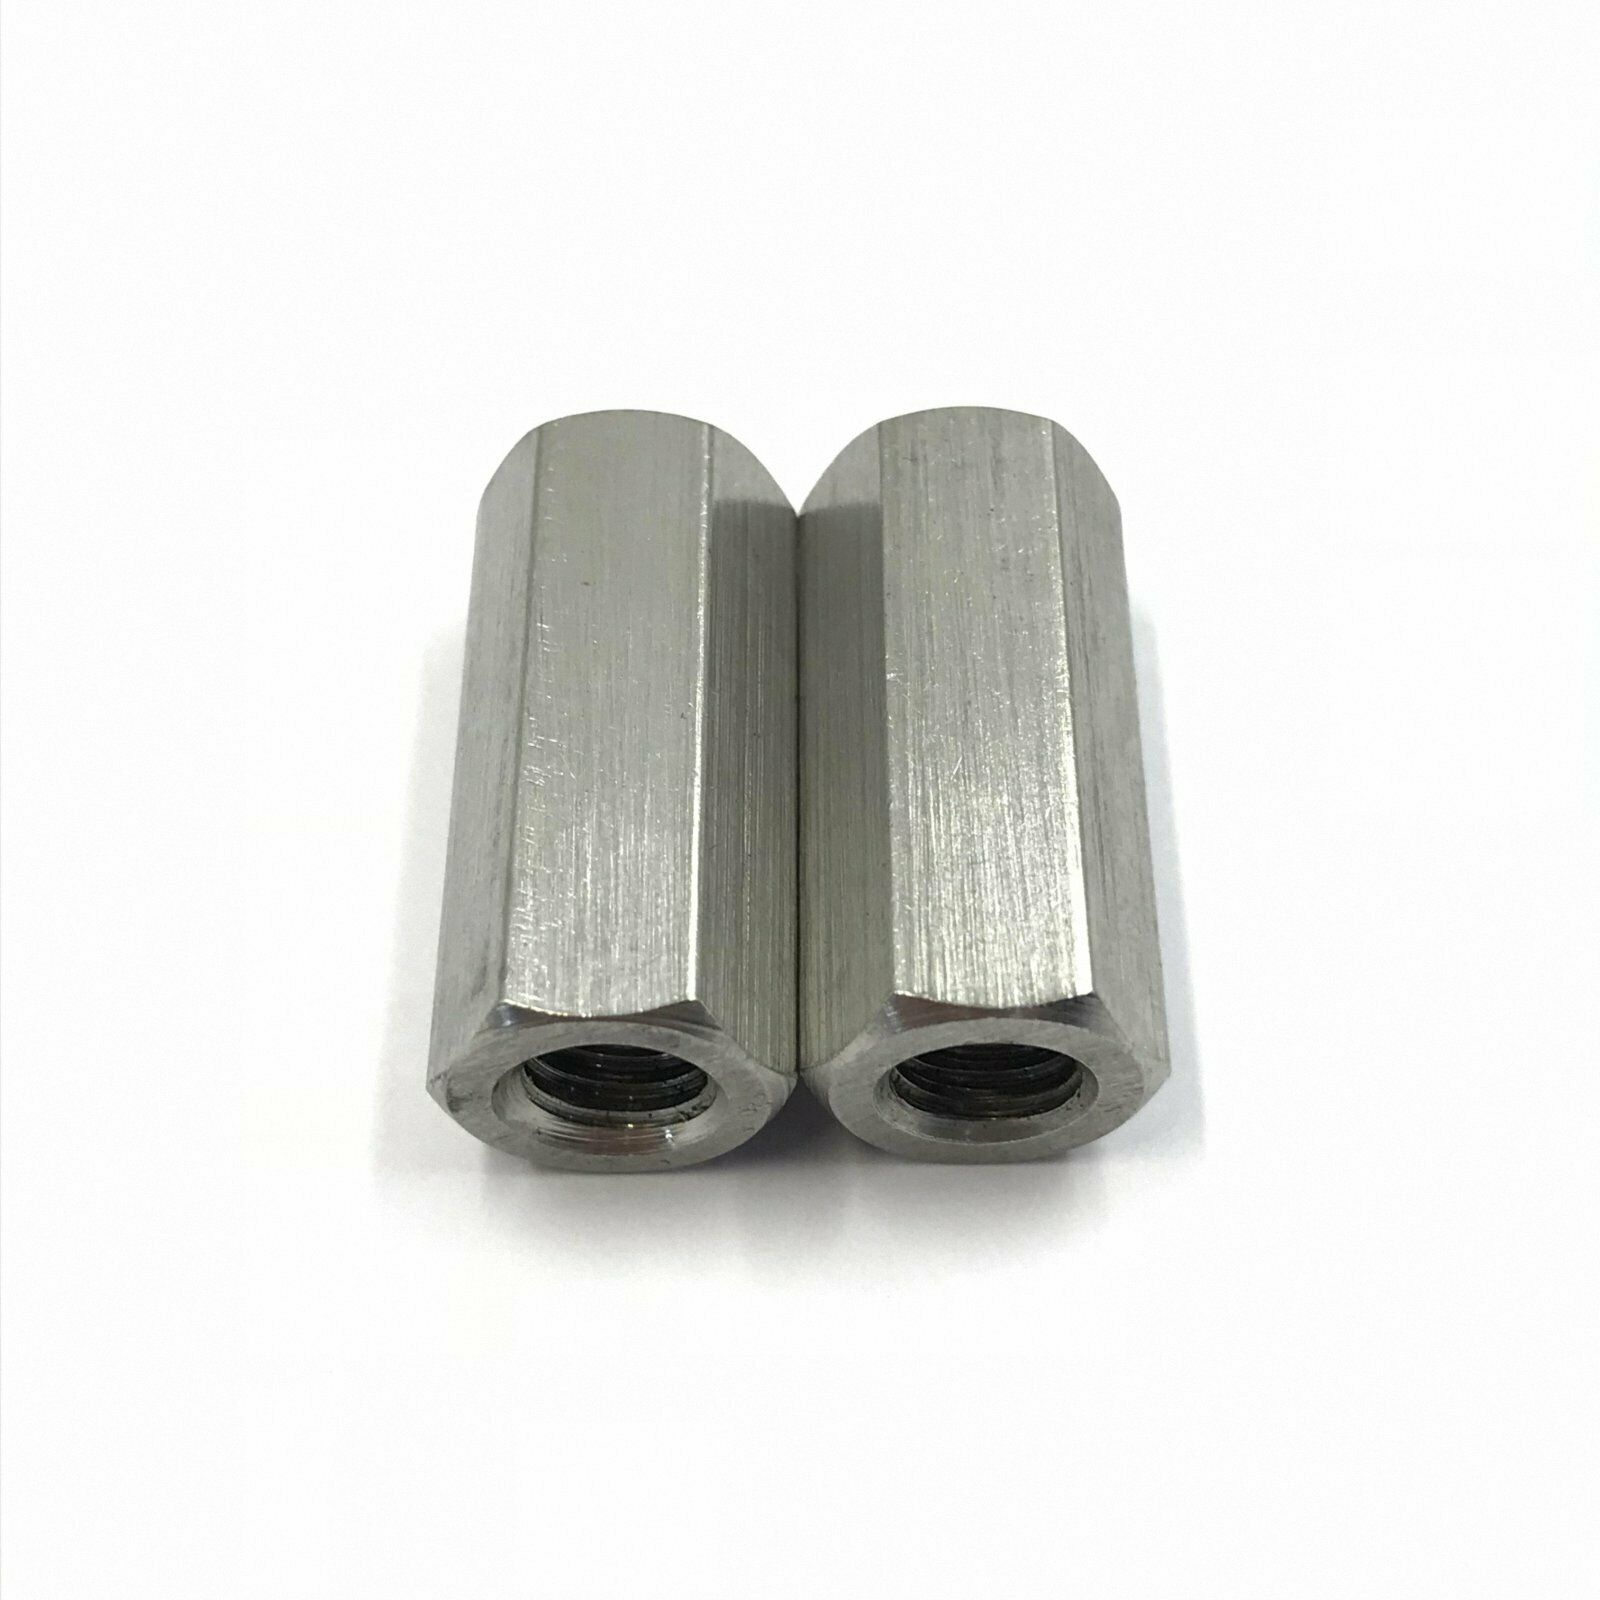 2 Pcs M8 x 1.25 304 Stainless Steel Long Rod Coupling Hex Nut [M_M_S]